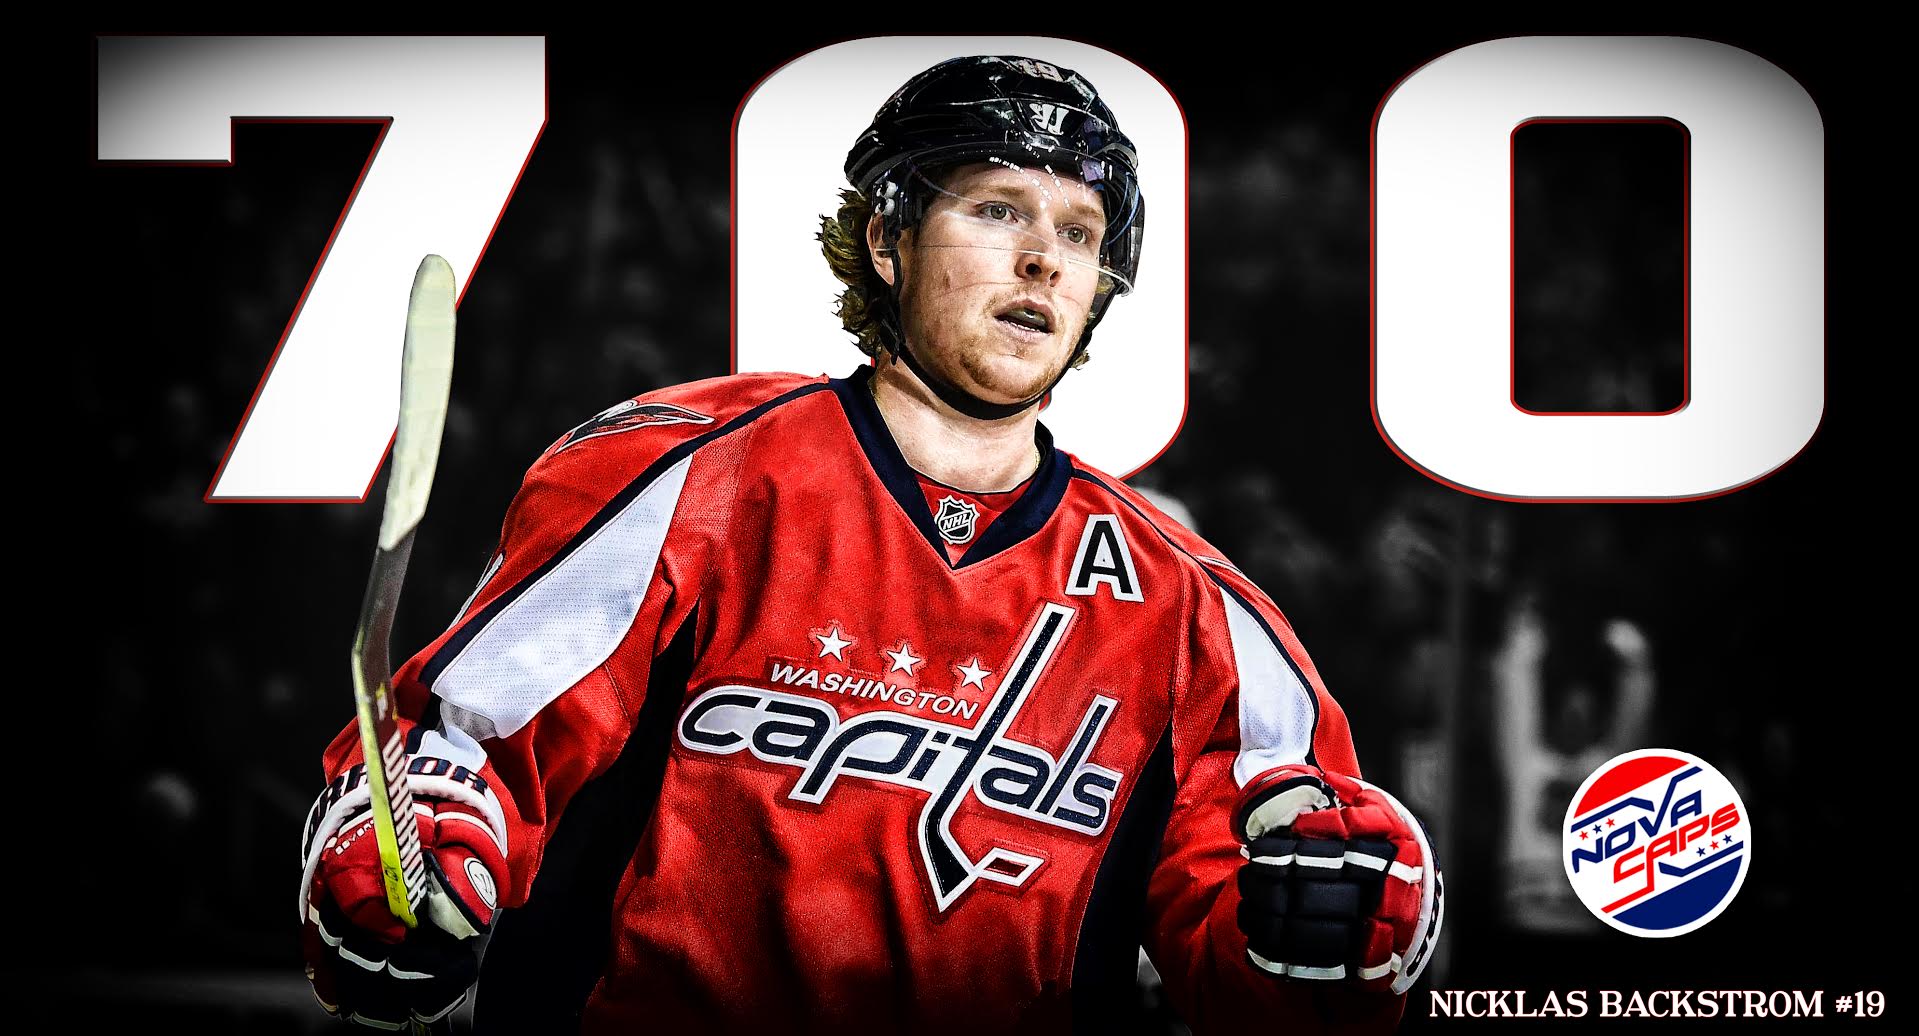 Nicklas Backstrom Records His 700th Career Point